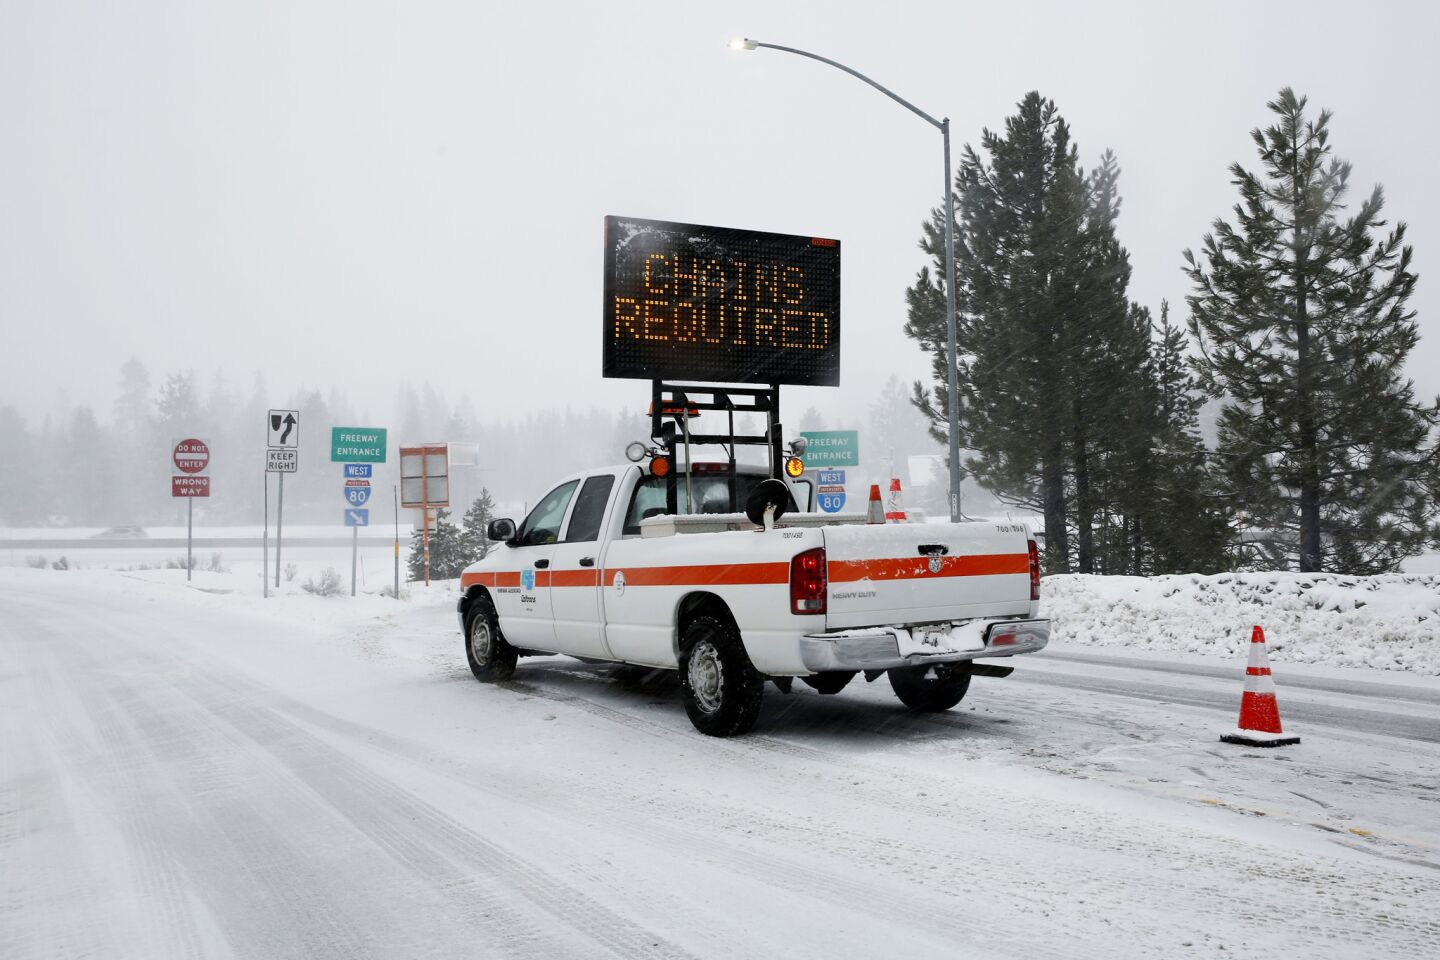 On a snowy day, a sign makes it clear that chains are required on this stretch of Interstate 80 in Truckee.